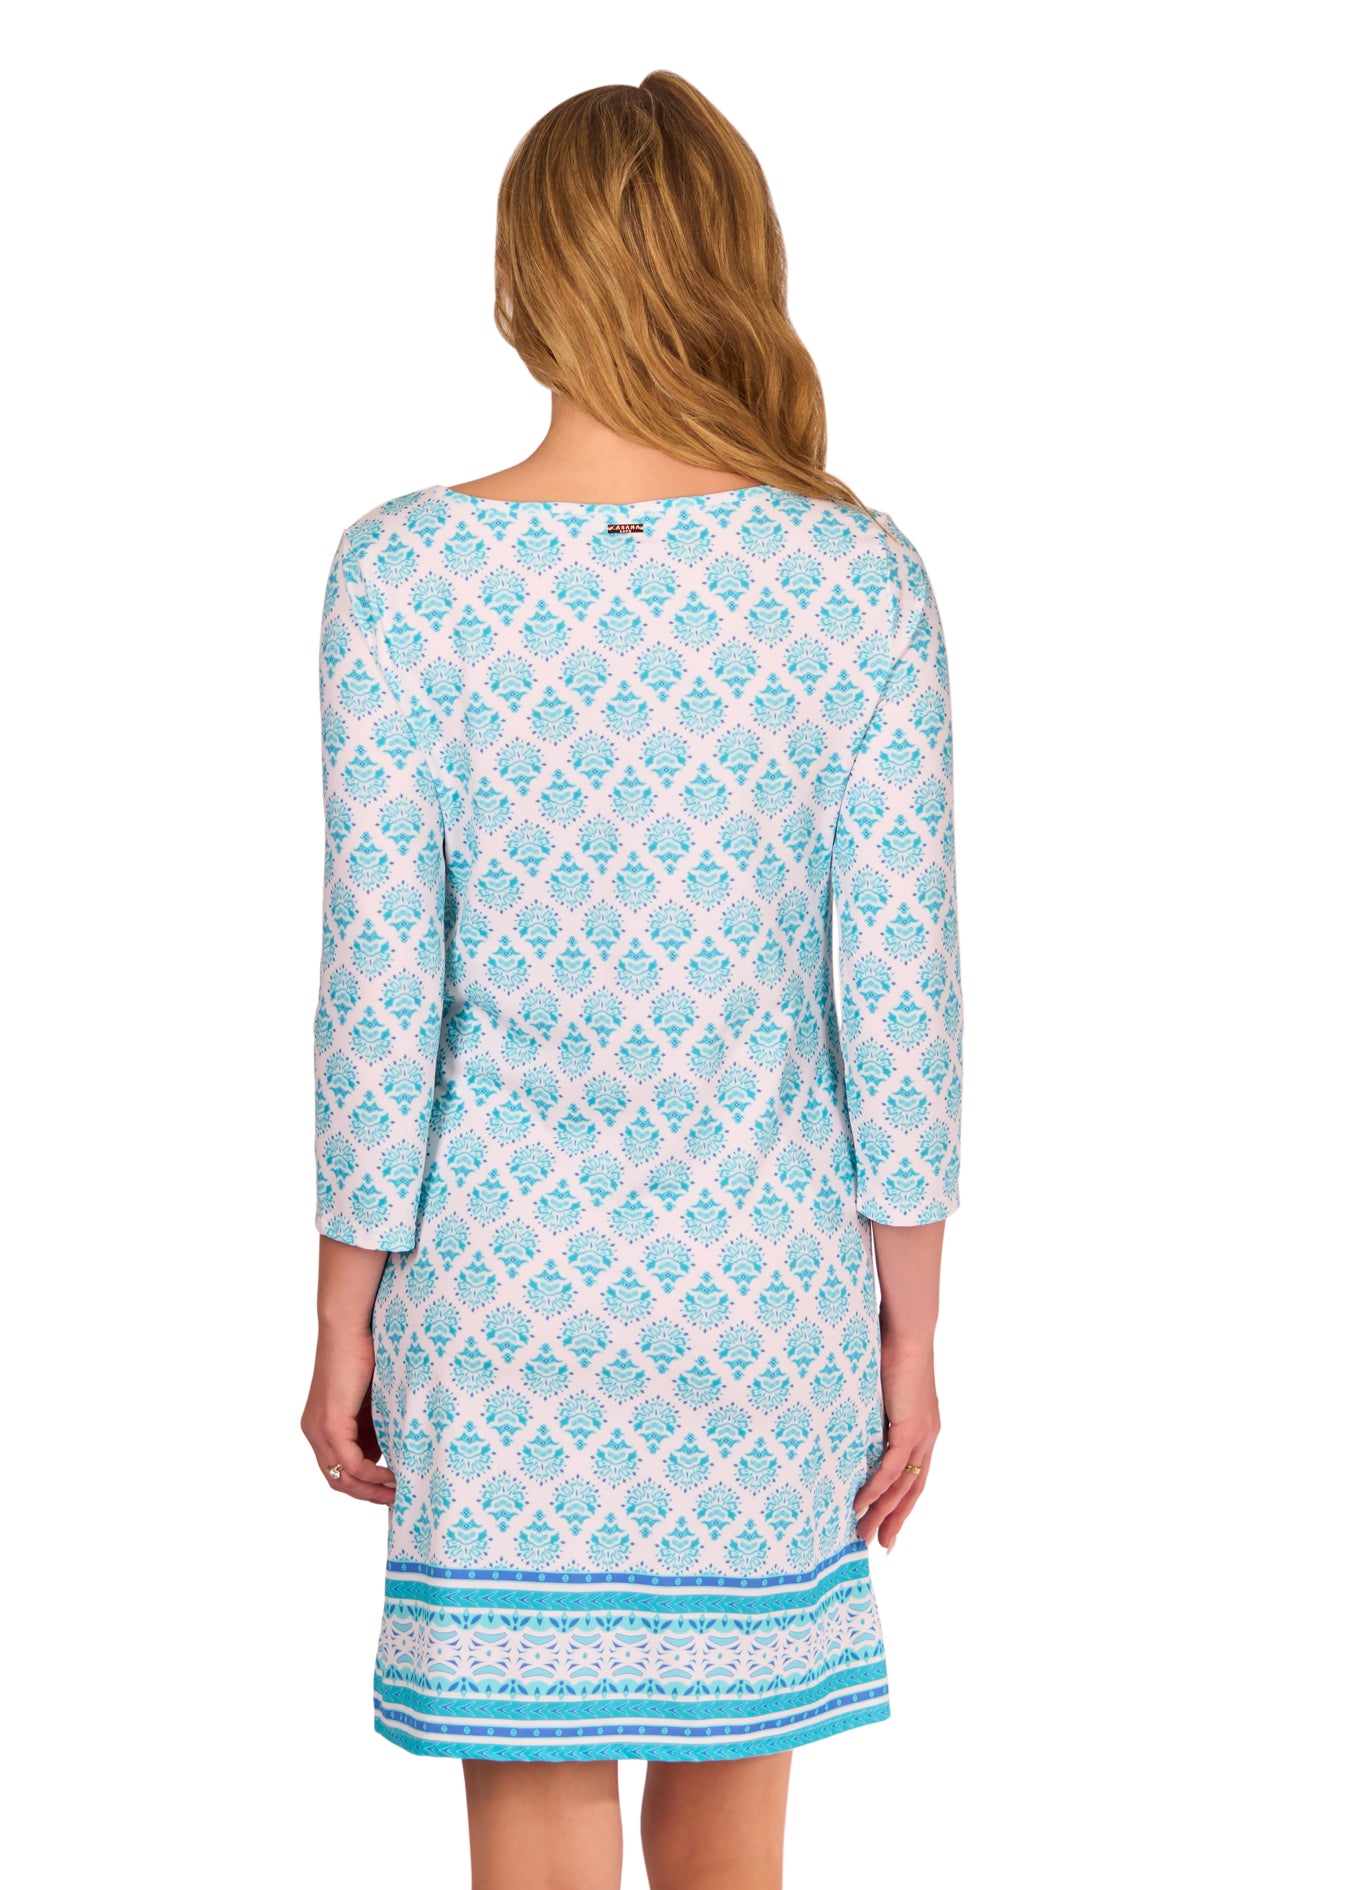 Back of Blonde woman wearing the Amalfi Coast Cabana Shift Dress in front of a white background.